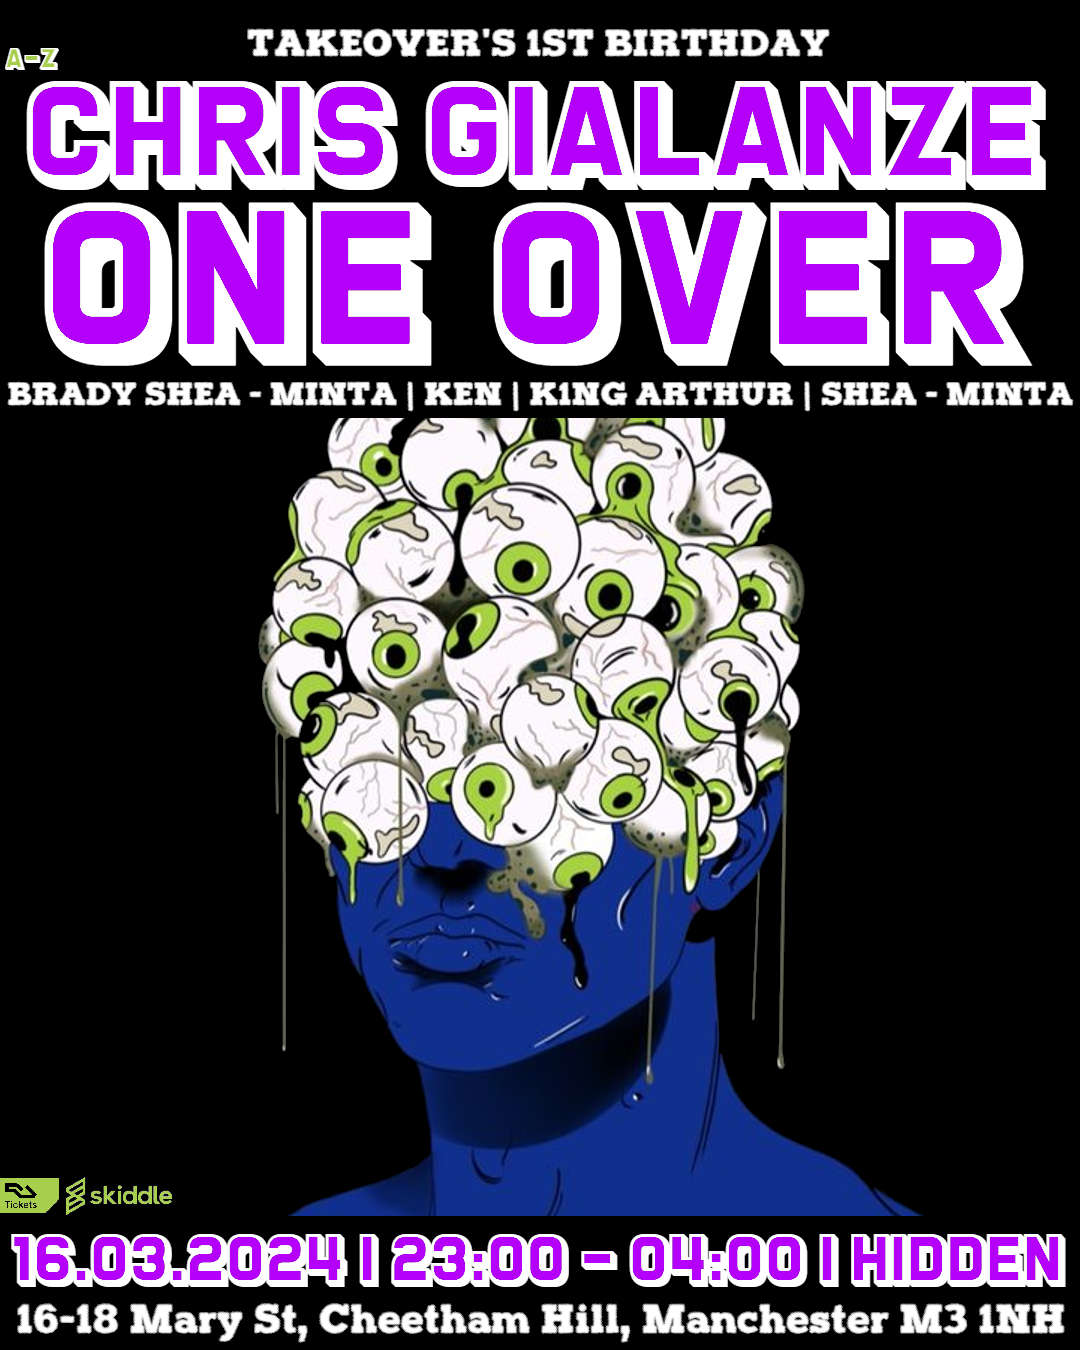 Takeover: Chris Gialanze, One Over + Residents - フライヤー表